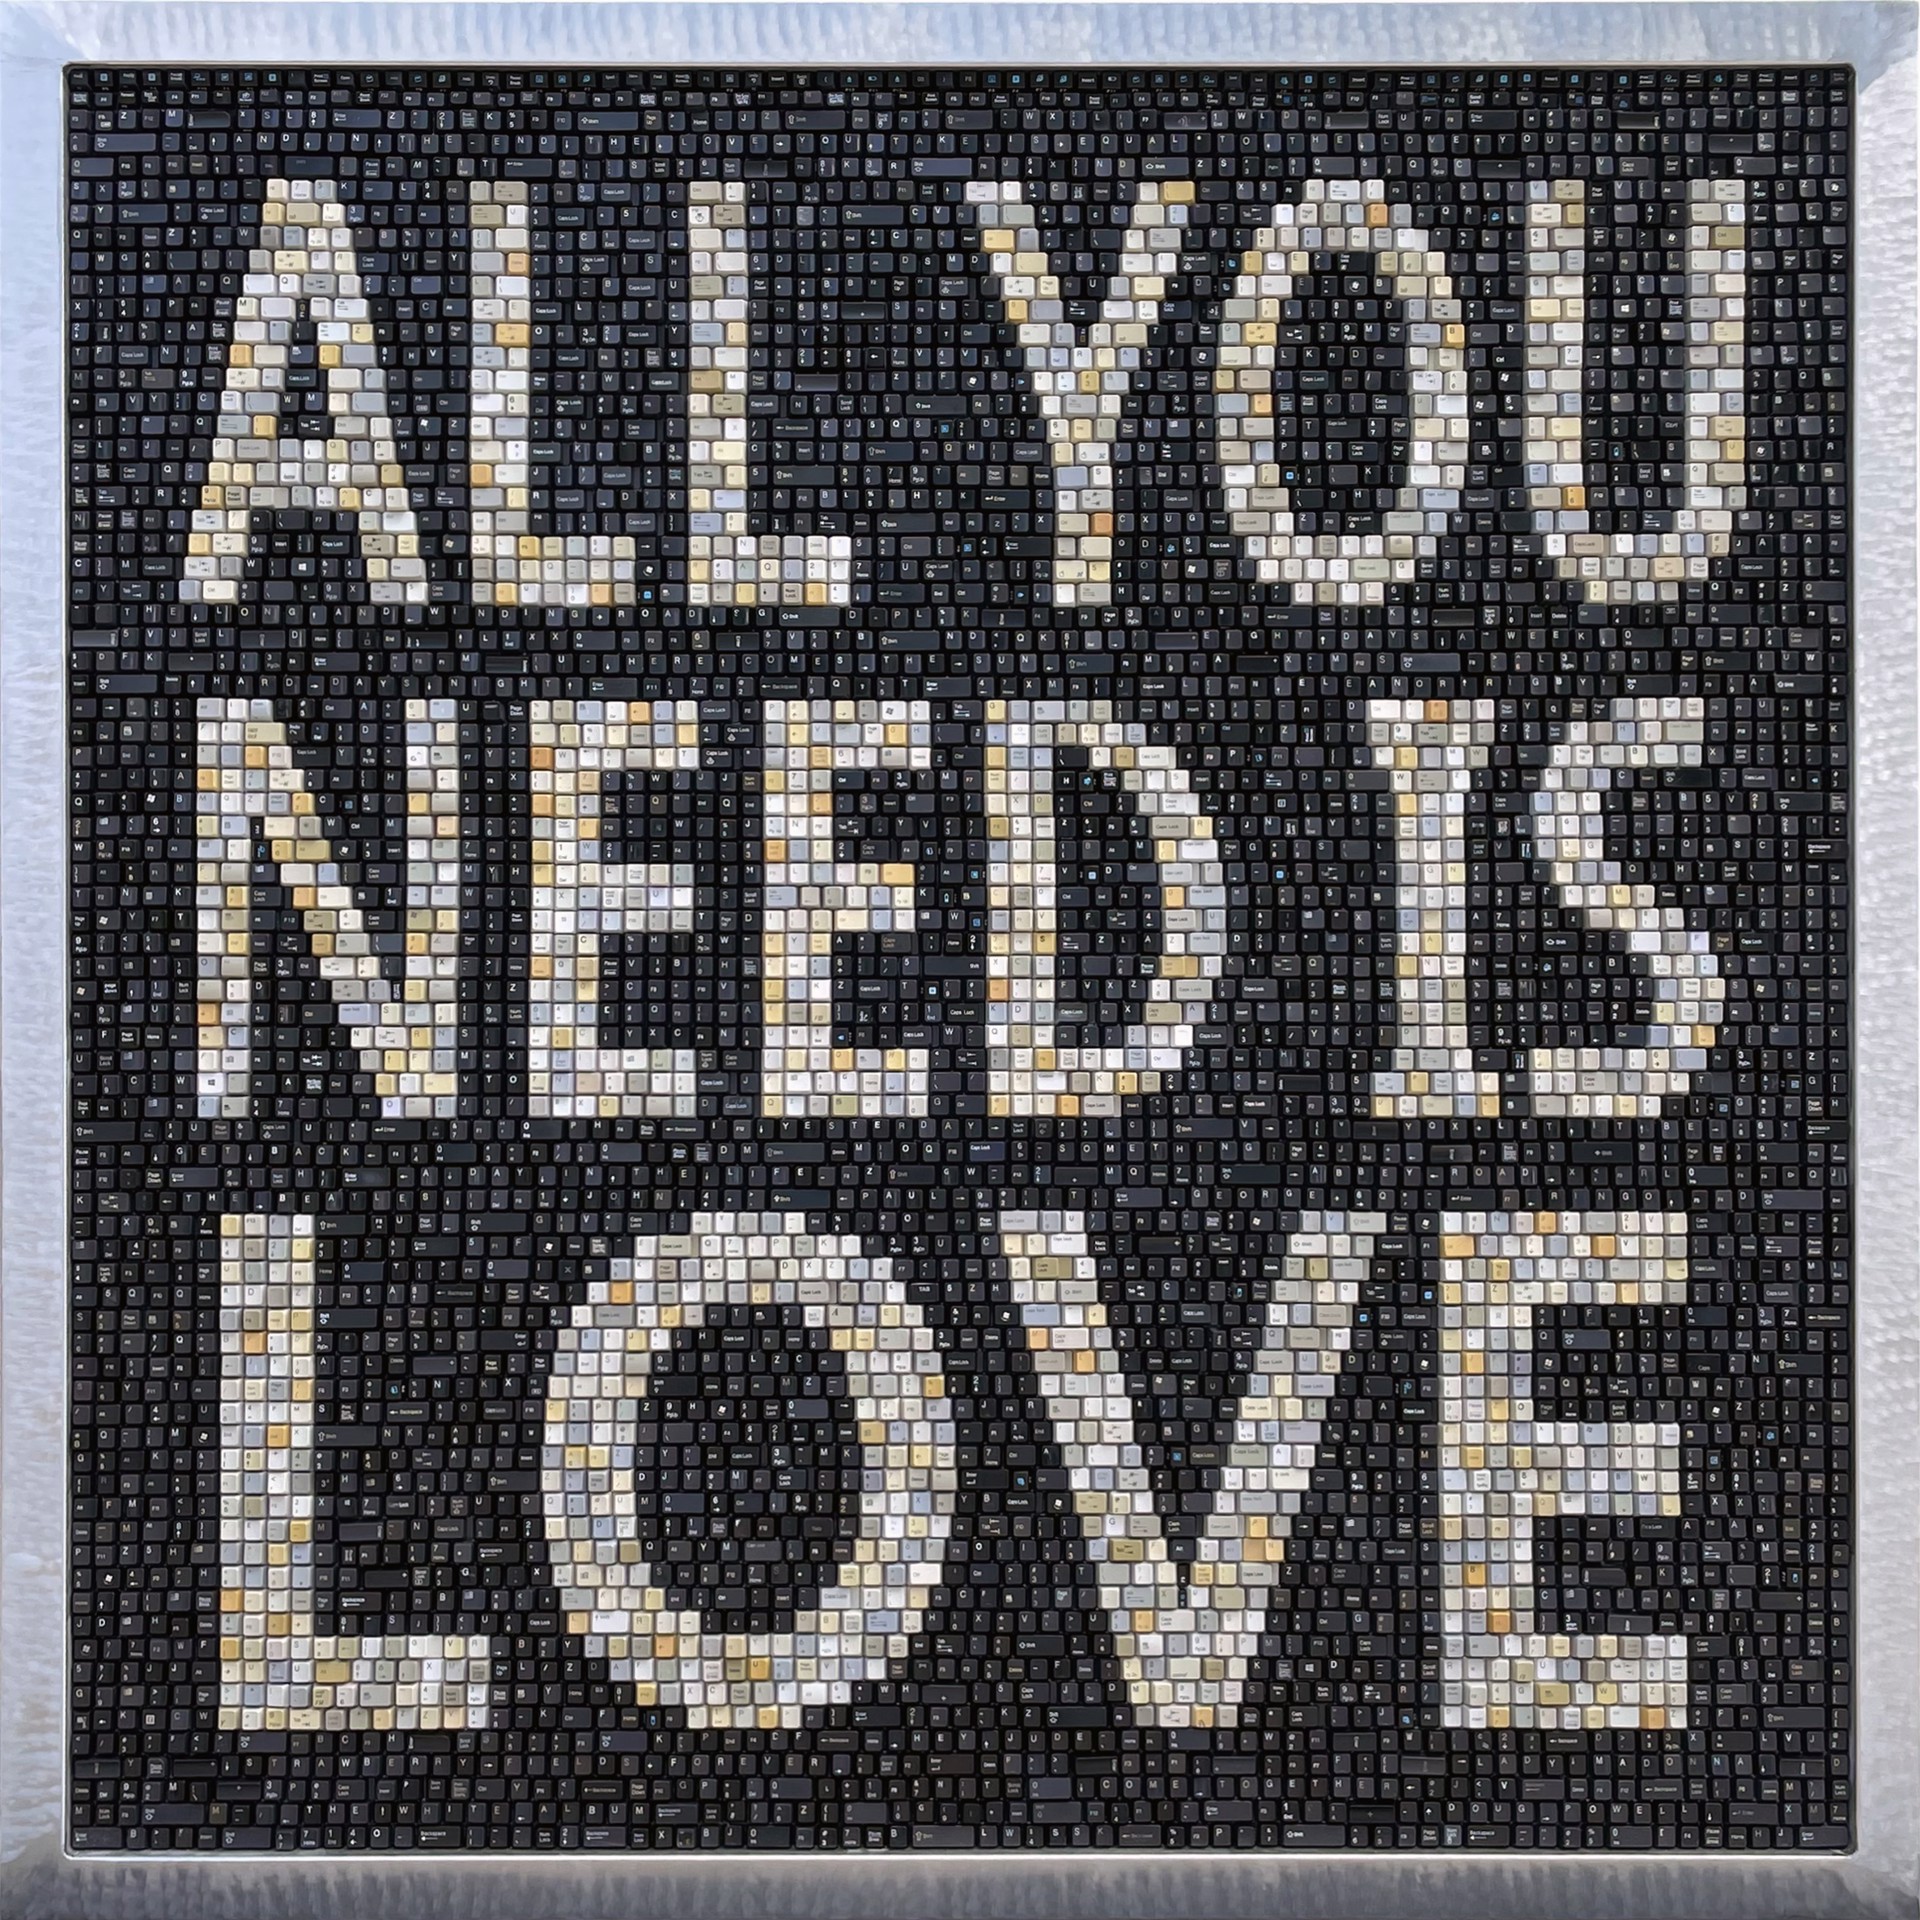 All You Need Is Love by Doug Powell